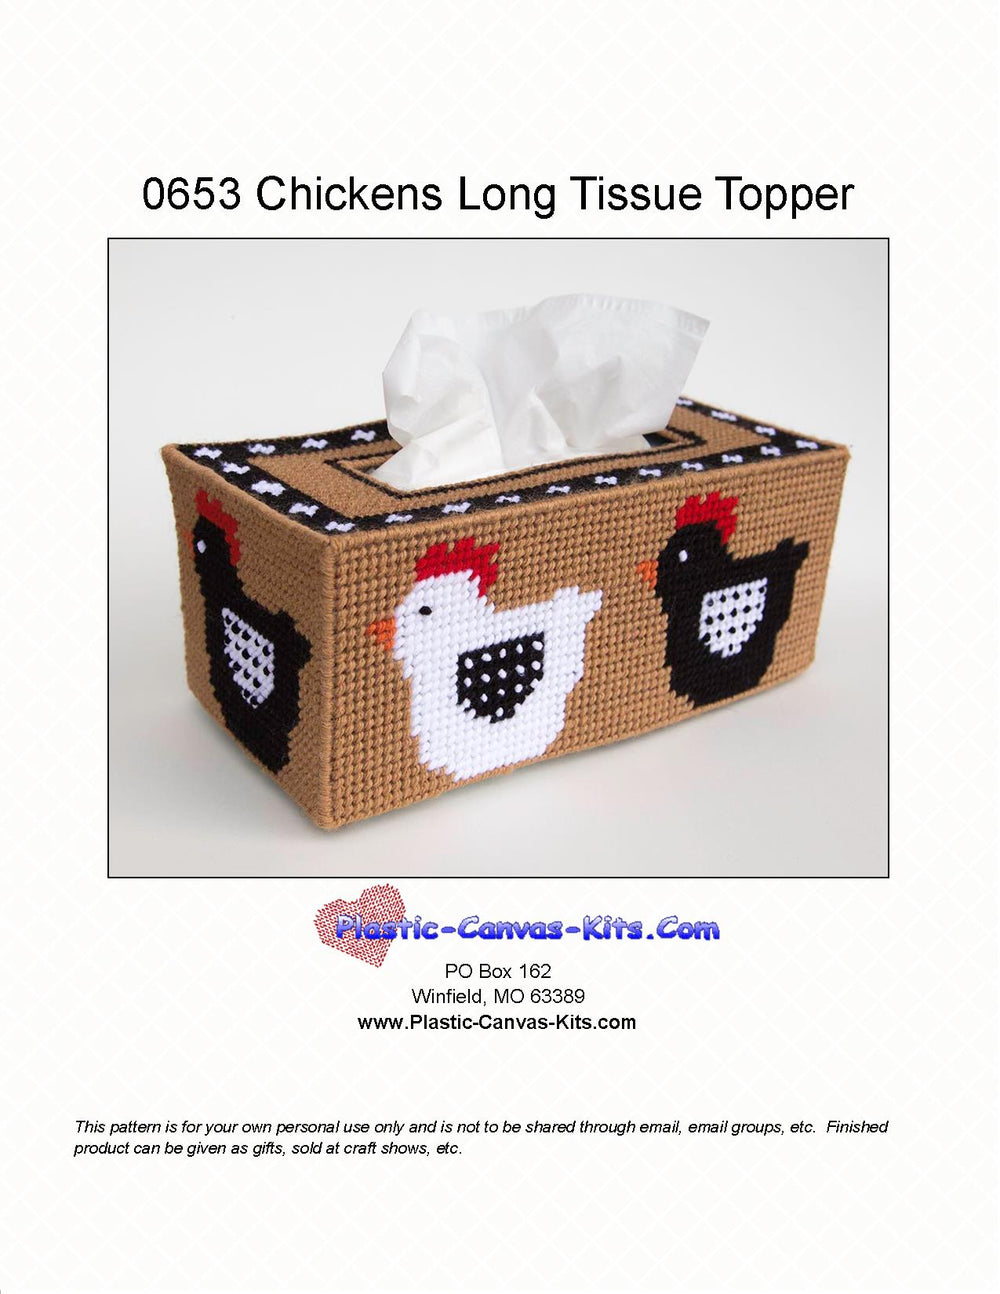 Chickens Long Tissue Topper